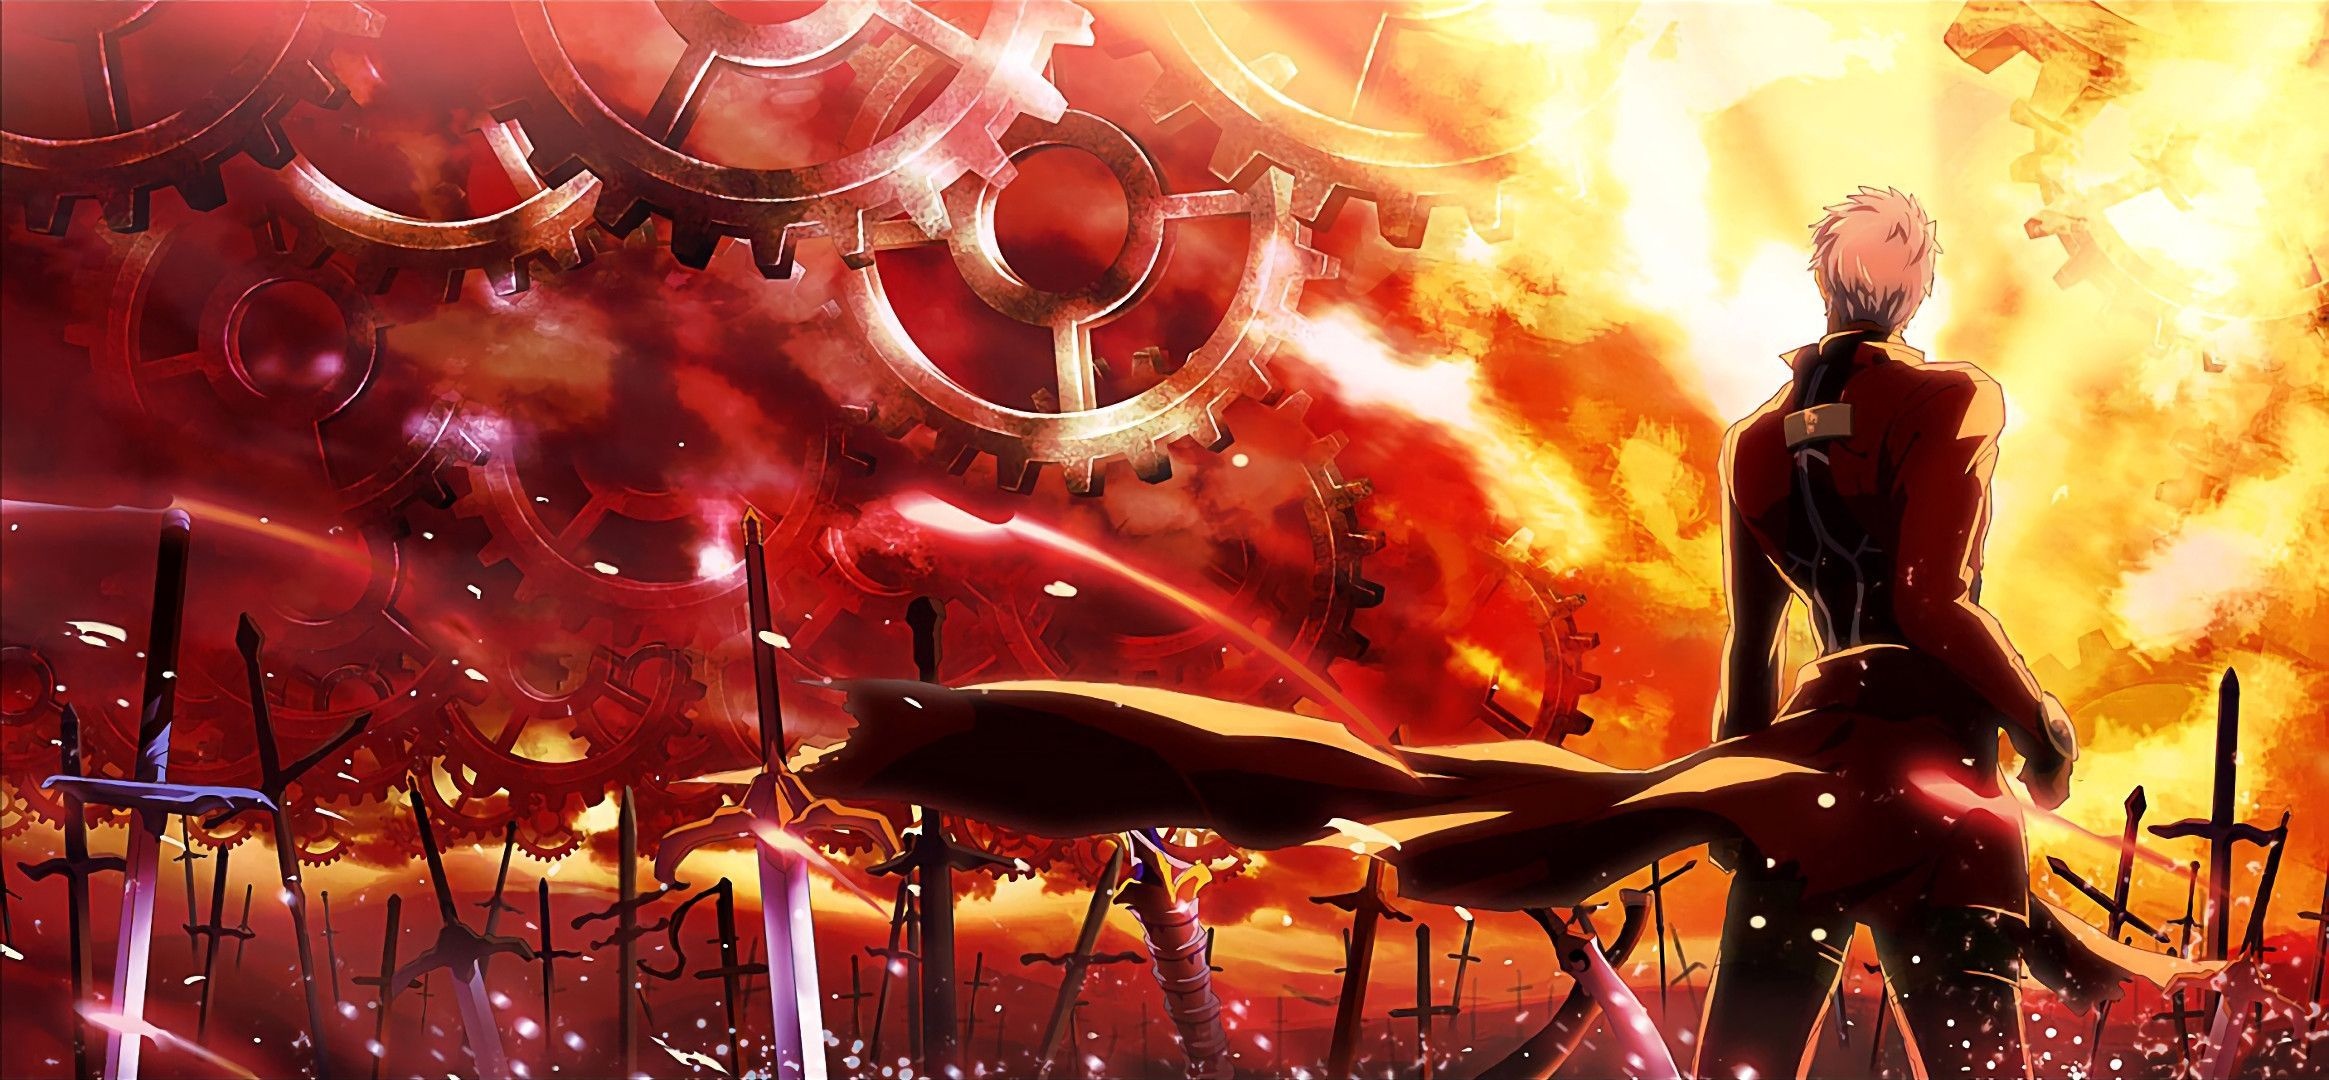 Fate/stay night, Unlimited Blade Works, HD wallpapers, Anime background, 2330x1080 Dual Screen Desktop